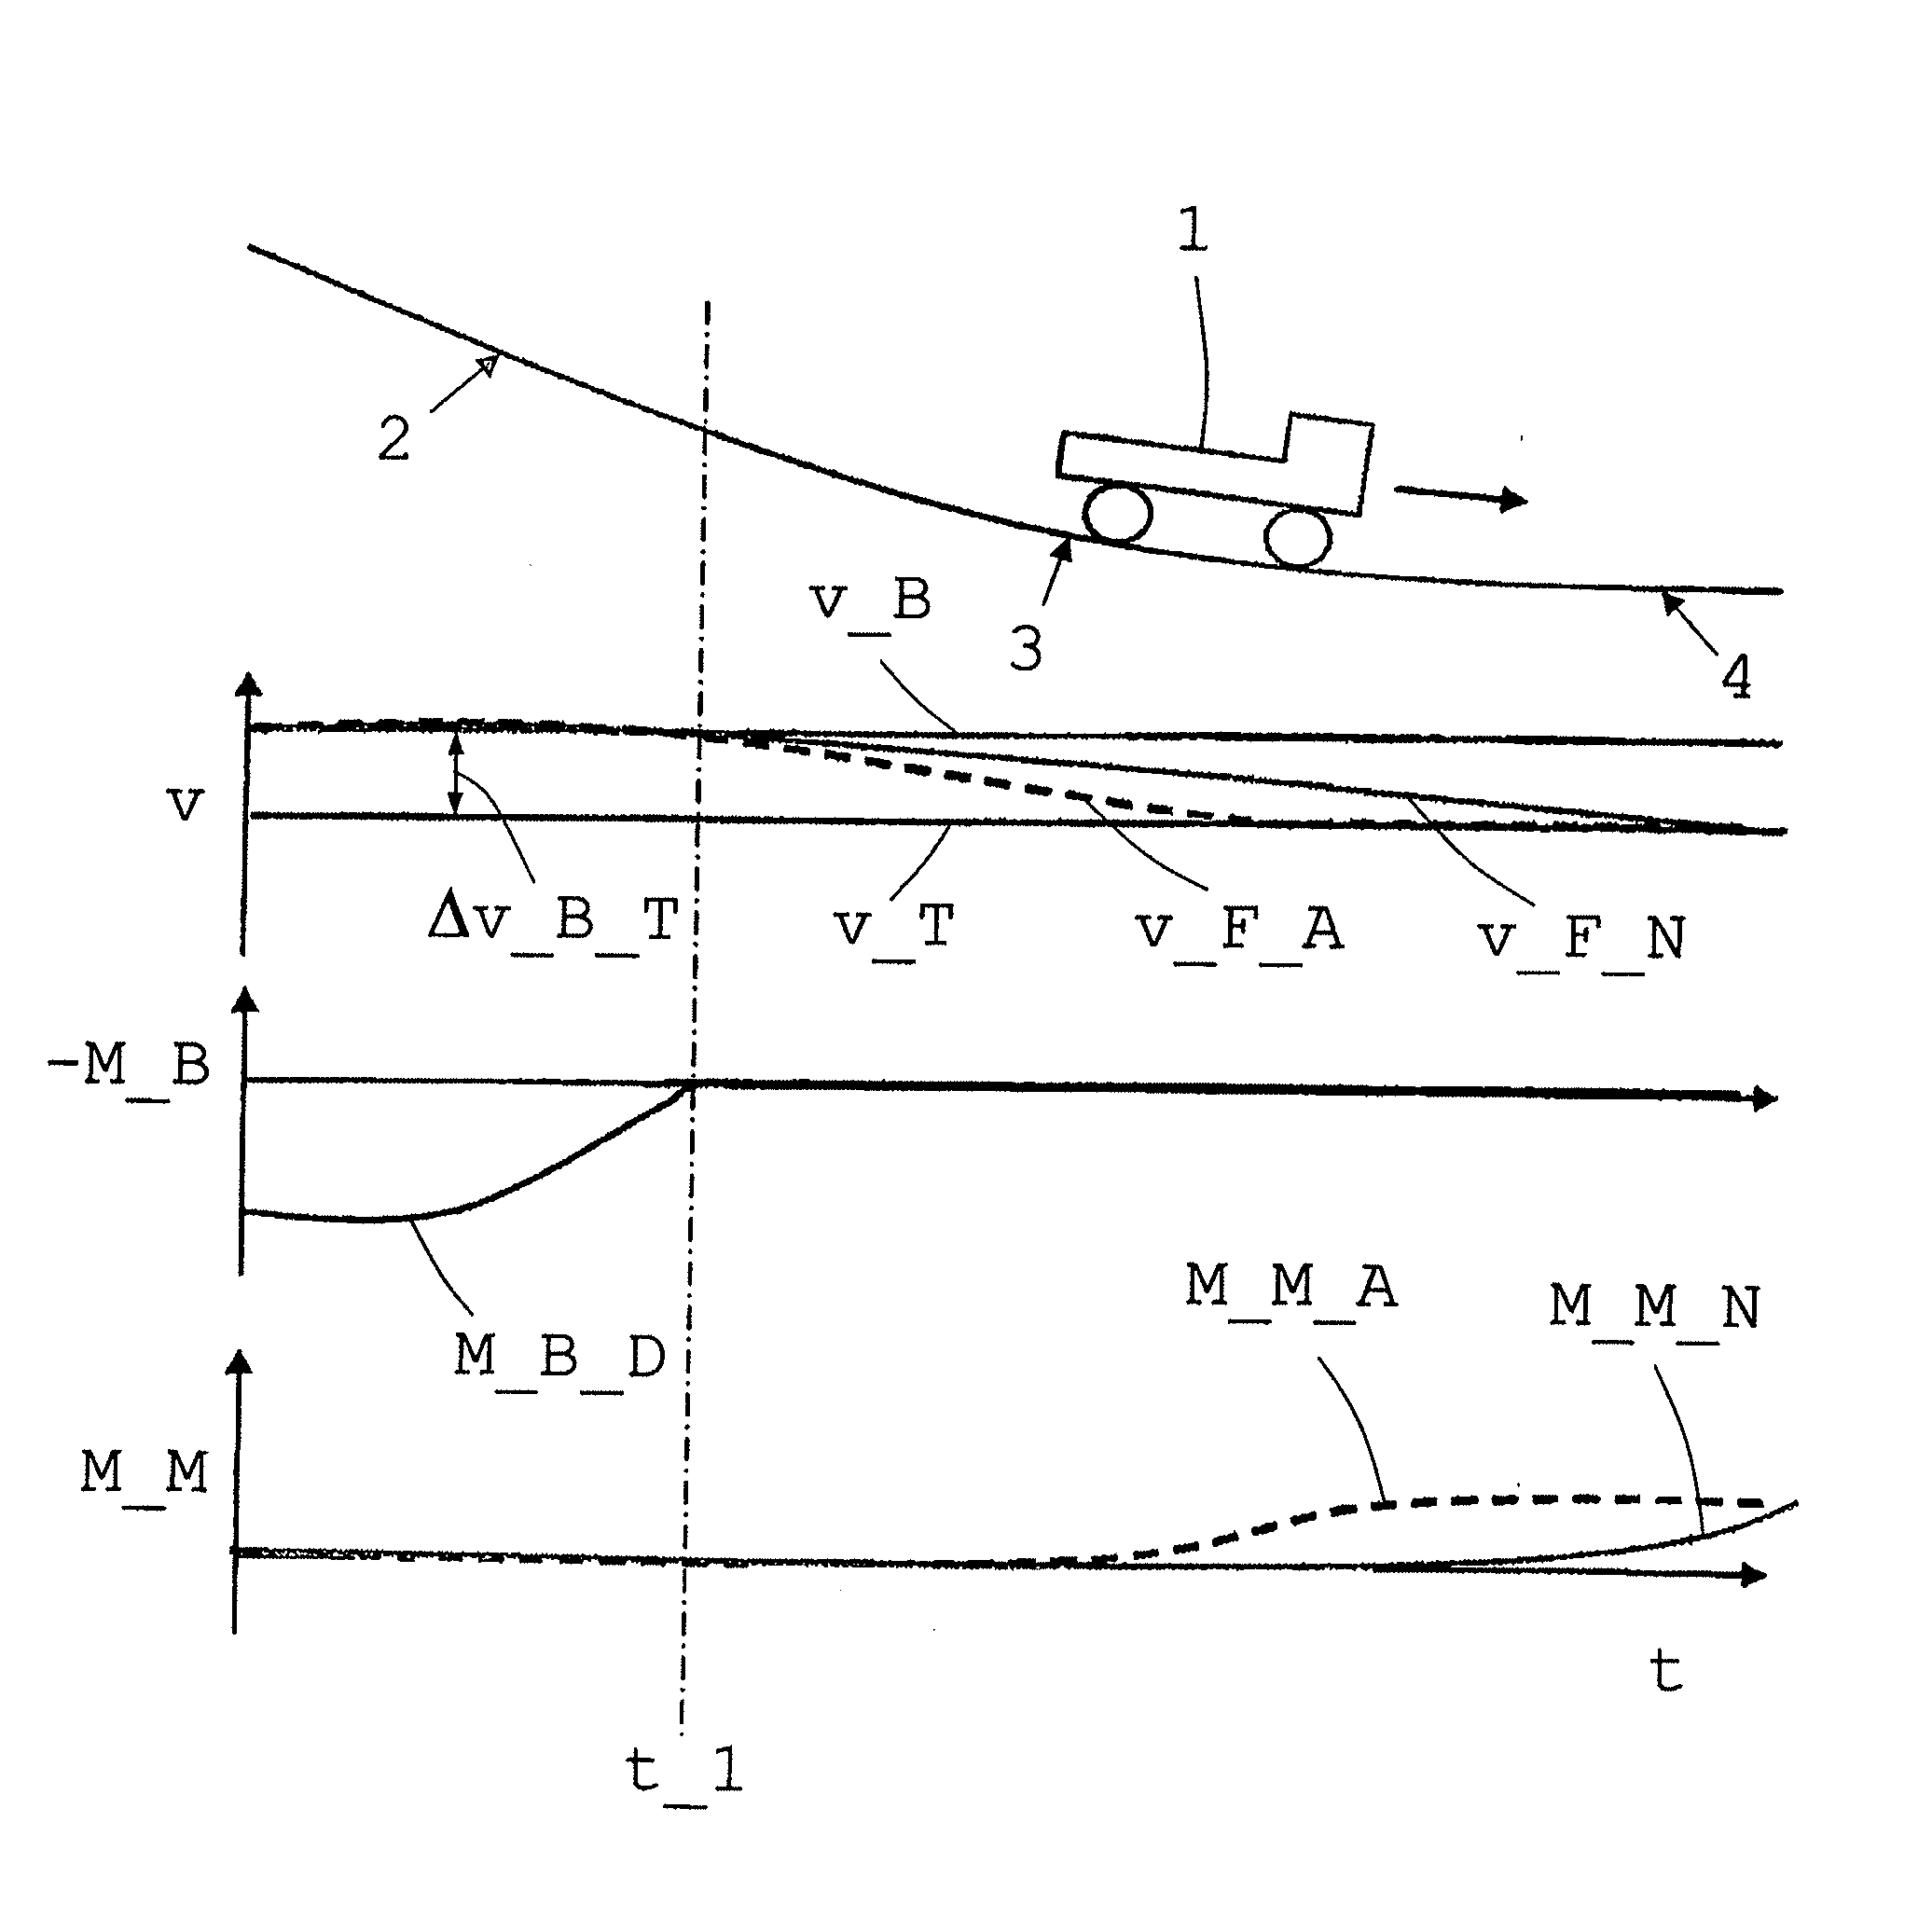 Method for controlling a rolling or coasting function of a vehicle